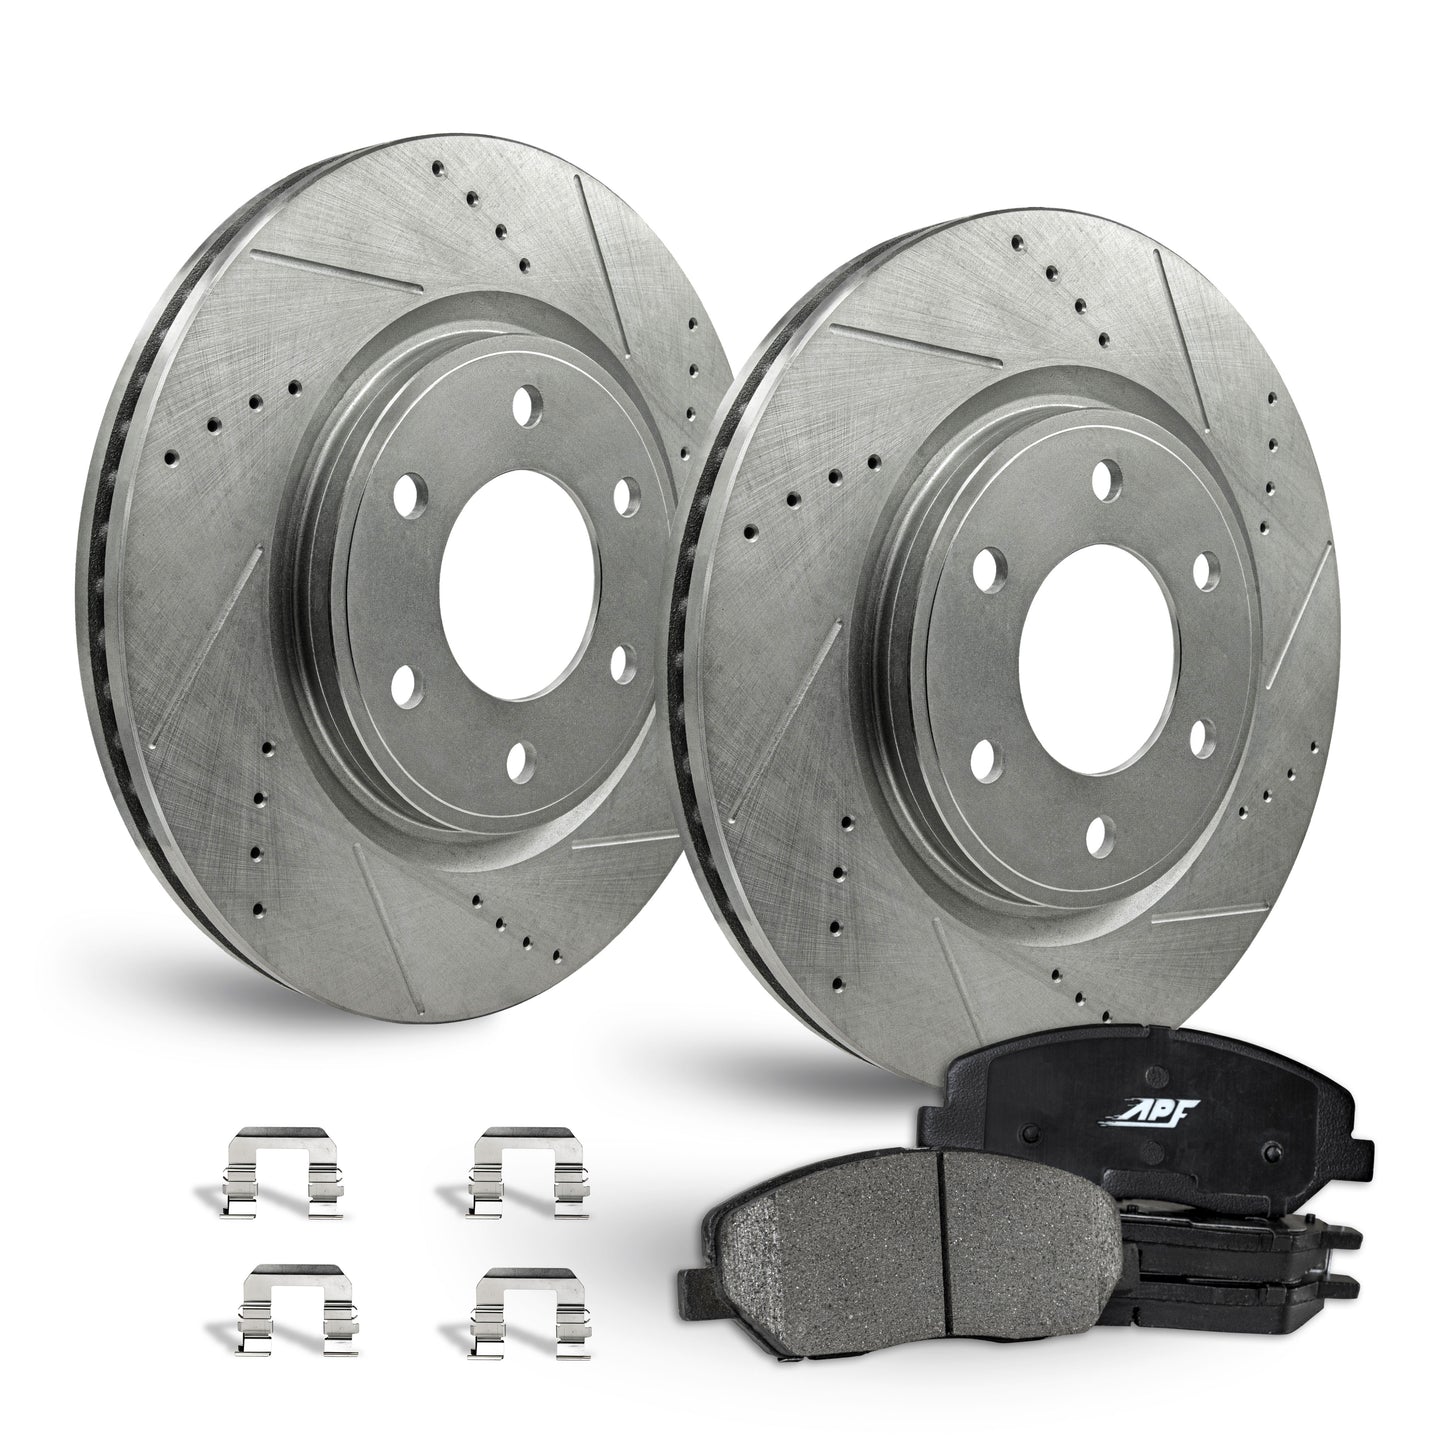 APF Rear Brake Kit compatible with Nissan Pathfinder Armada 2004-2004 | Zinc Drilled Slotted Rotors with Ceramic Carbon Fiber Brake Pads